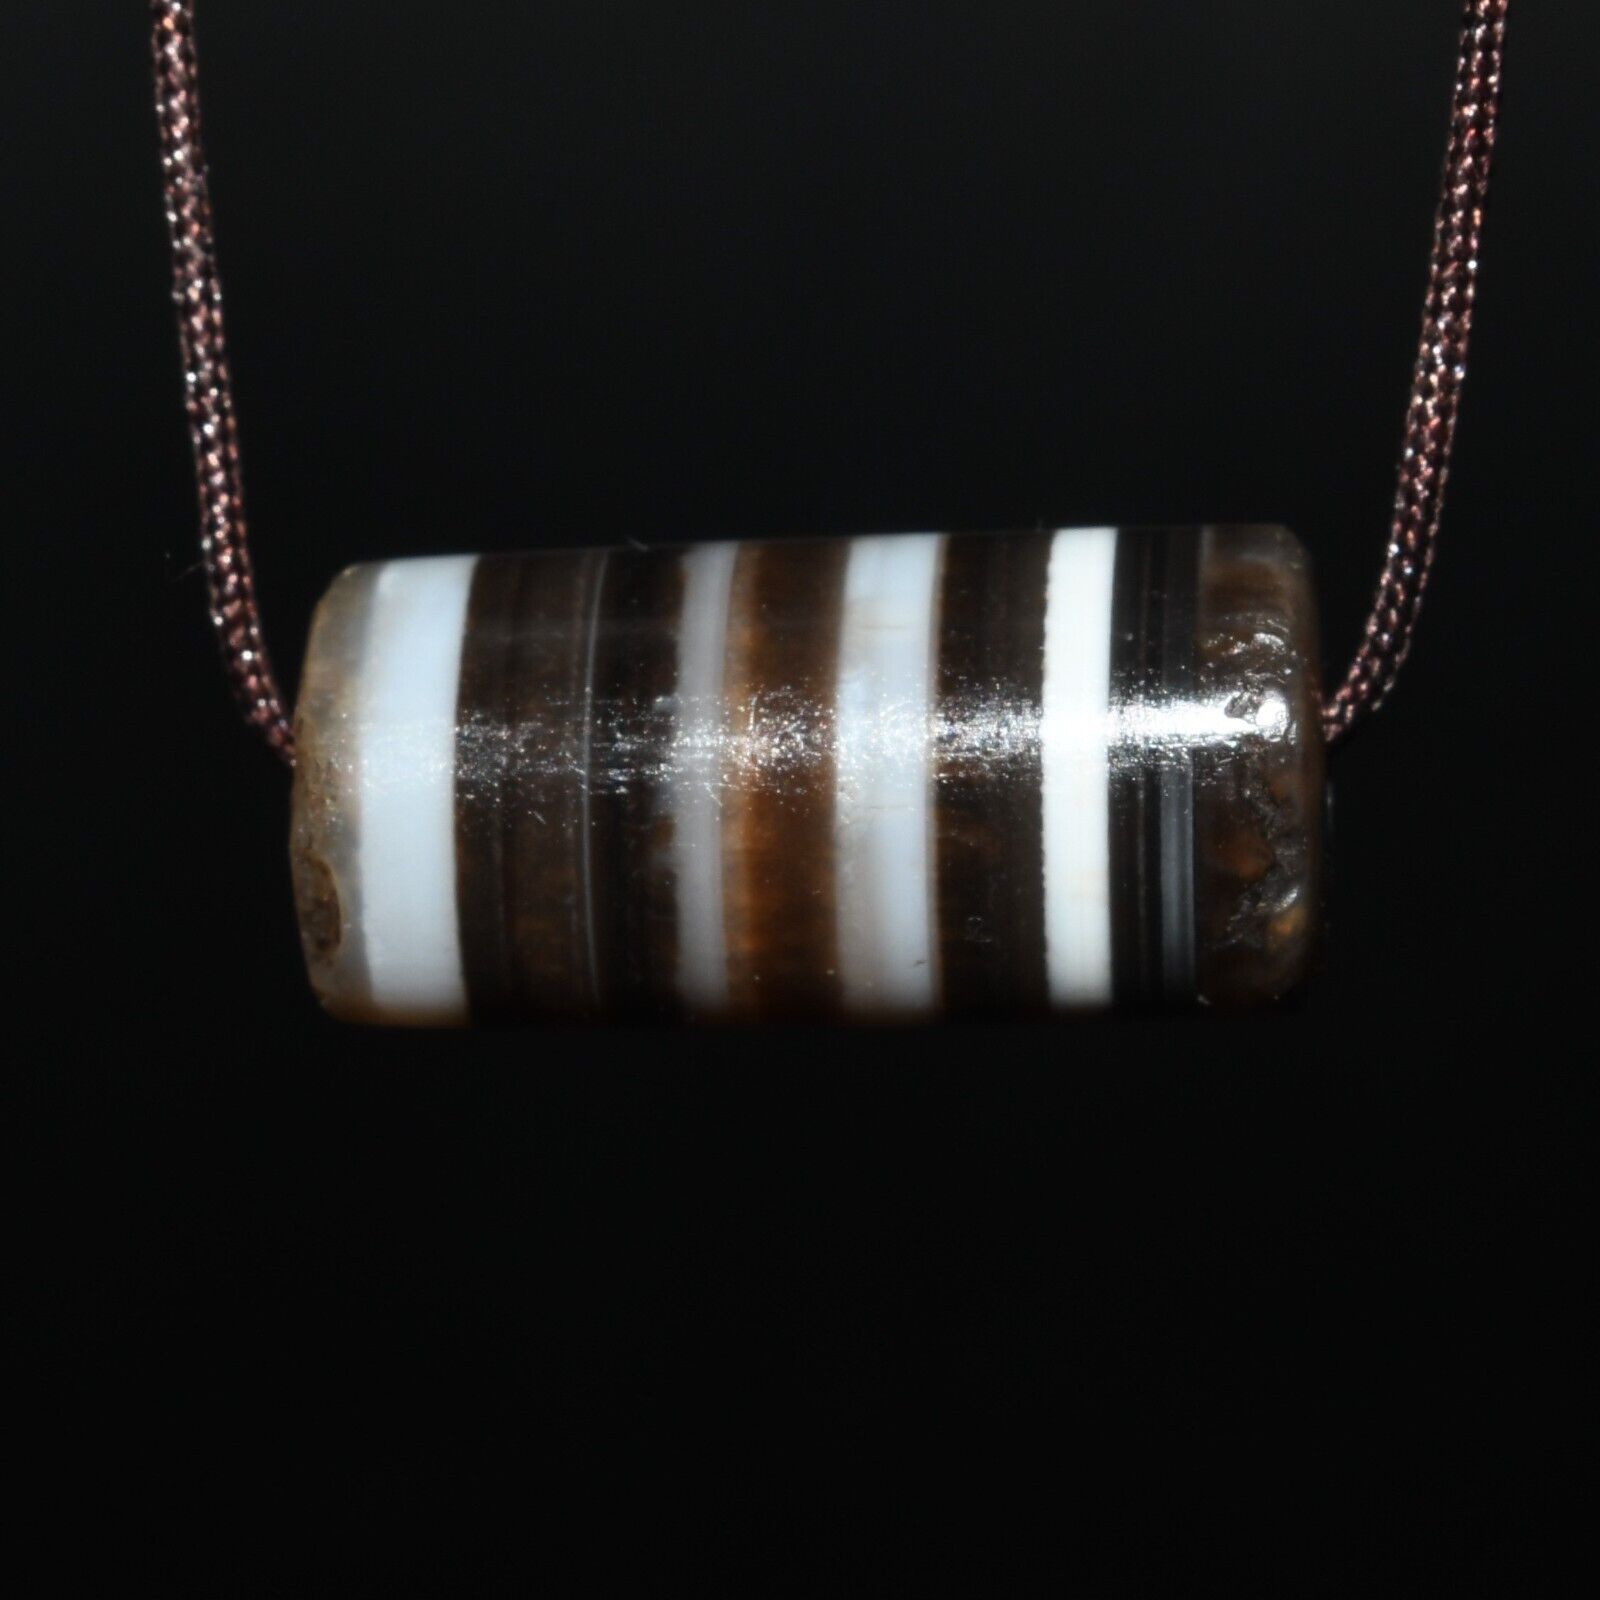 Genuine Ancient Banded Agate Bead with Stripes in Good Condition 1500+ Years Old